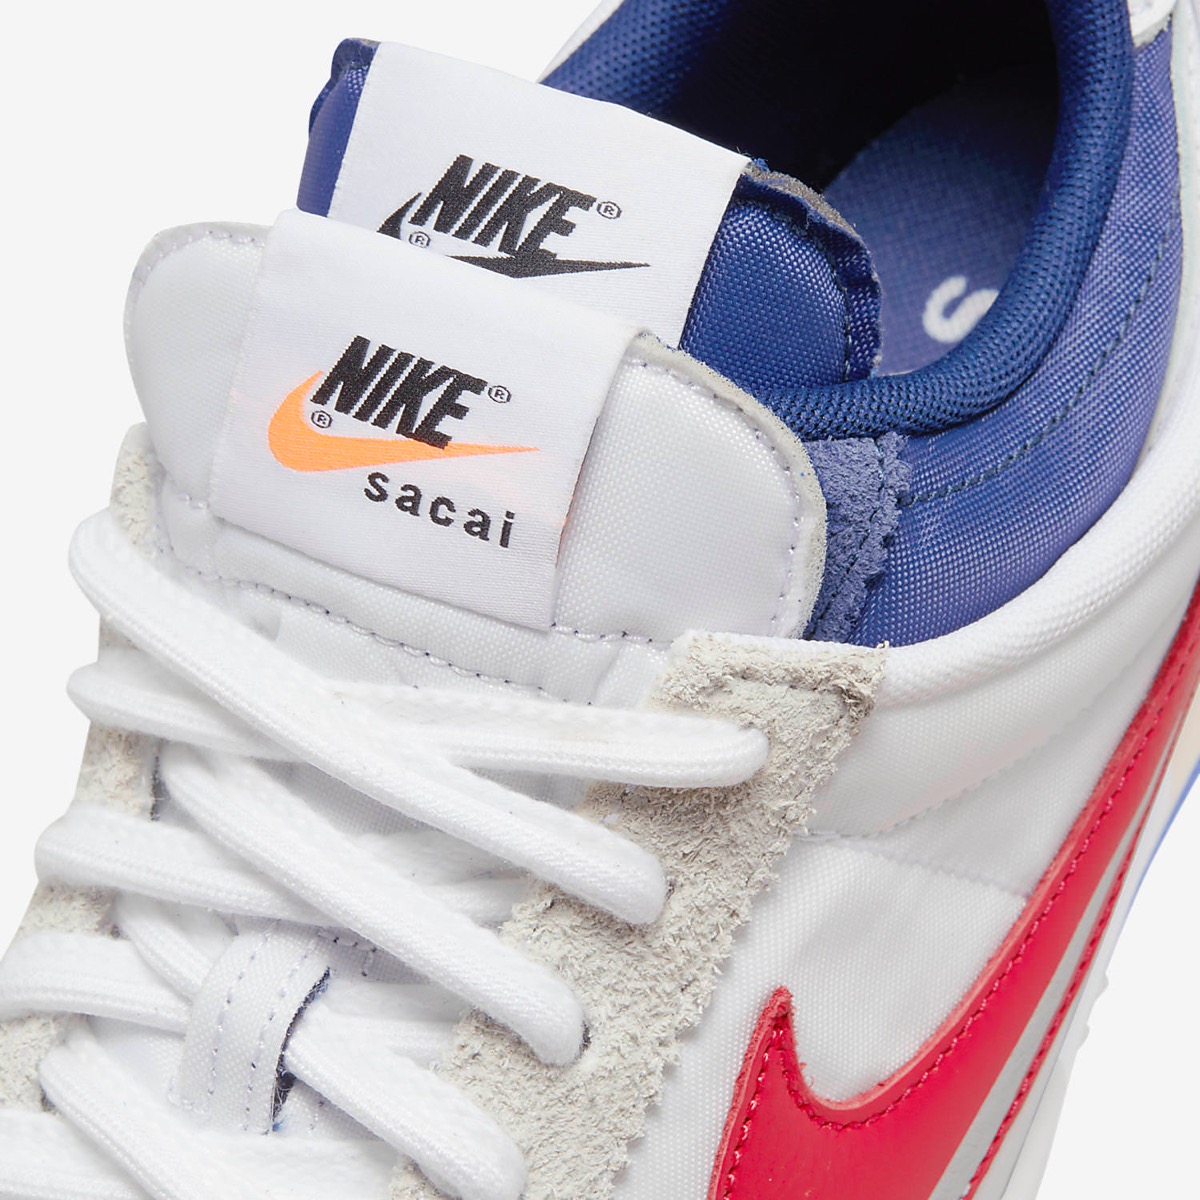 sacai × Nike『Zoom Cortez SP』の新色が国内12月8日／12月13日より発売予定 | UP TO DATE